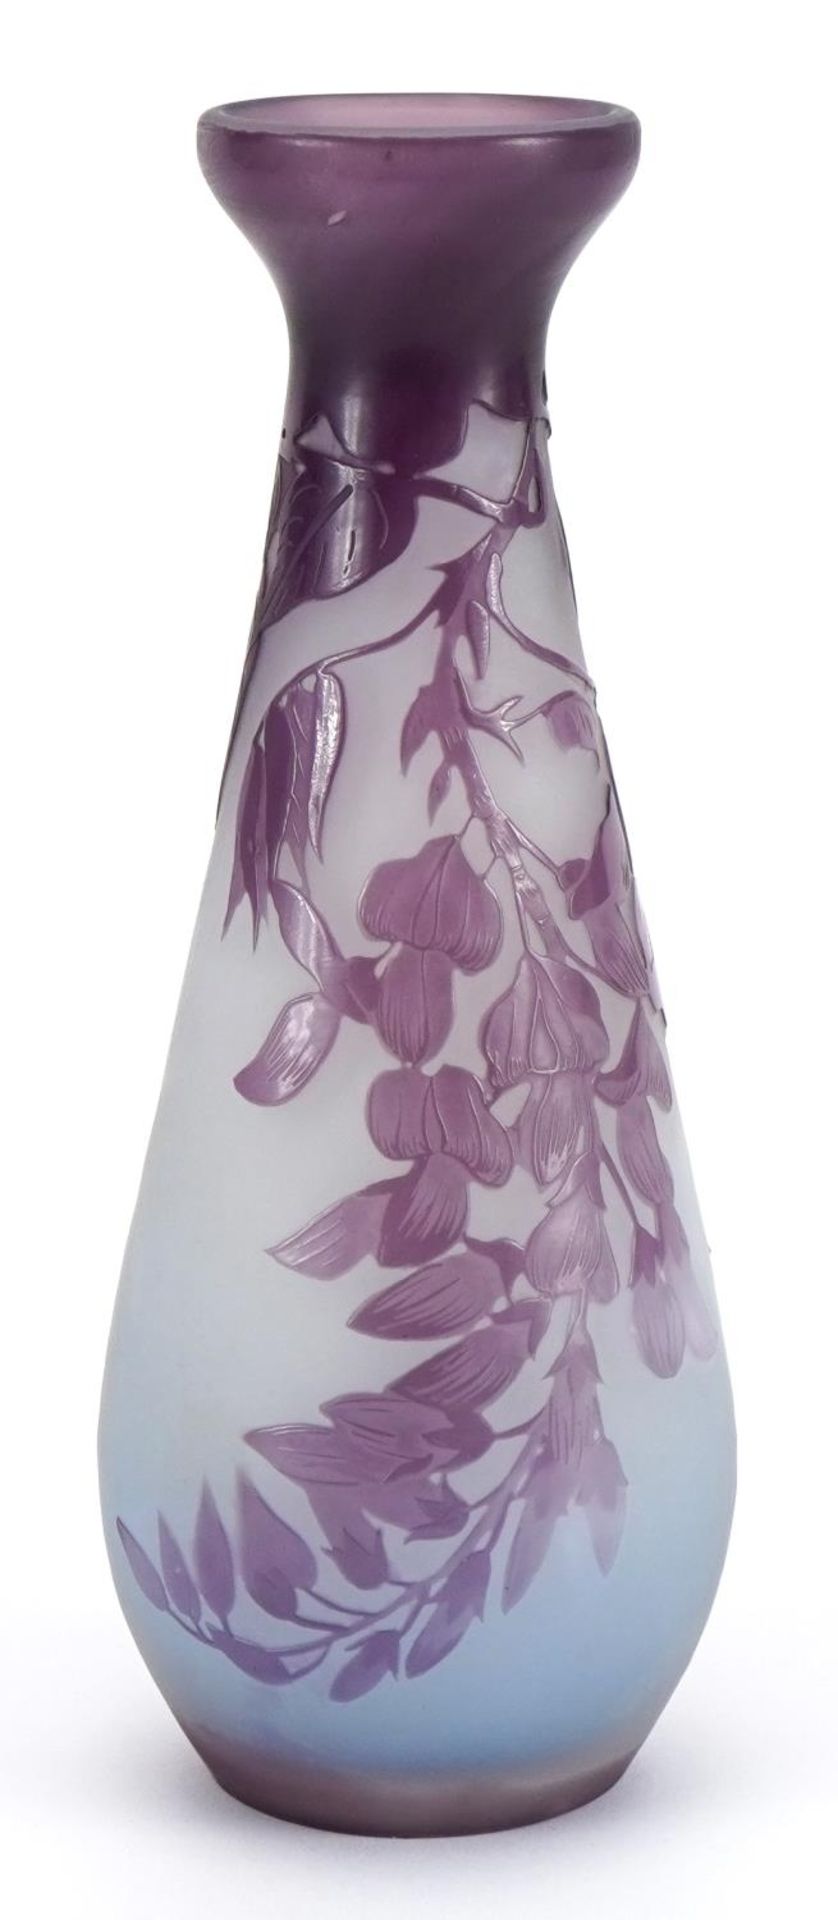 Emile Galle, early 20th century French cameo glass vase decorated with fuchsias, 20.5cm high